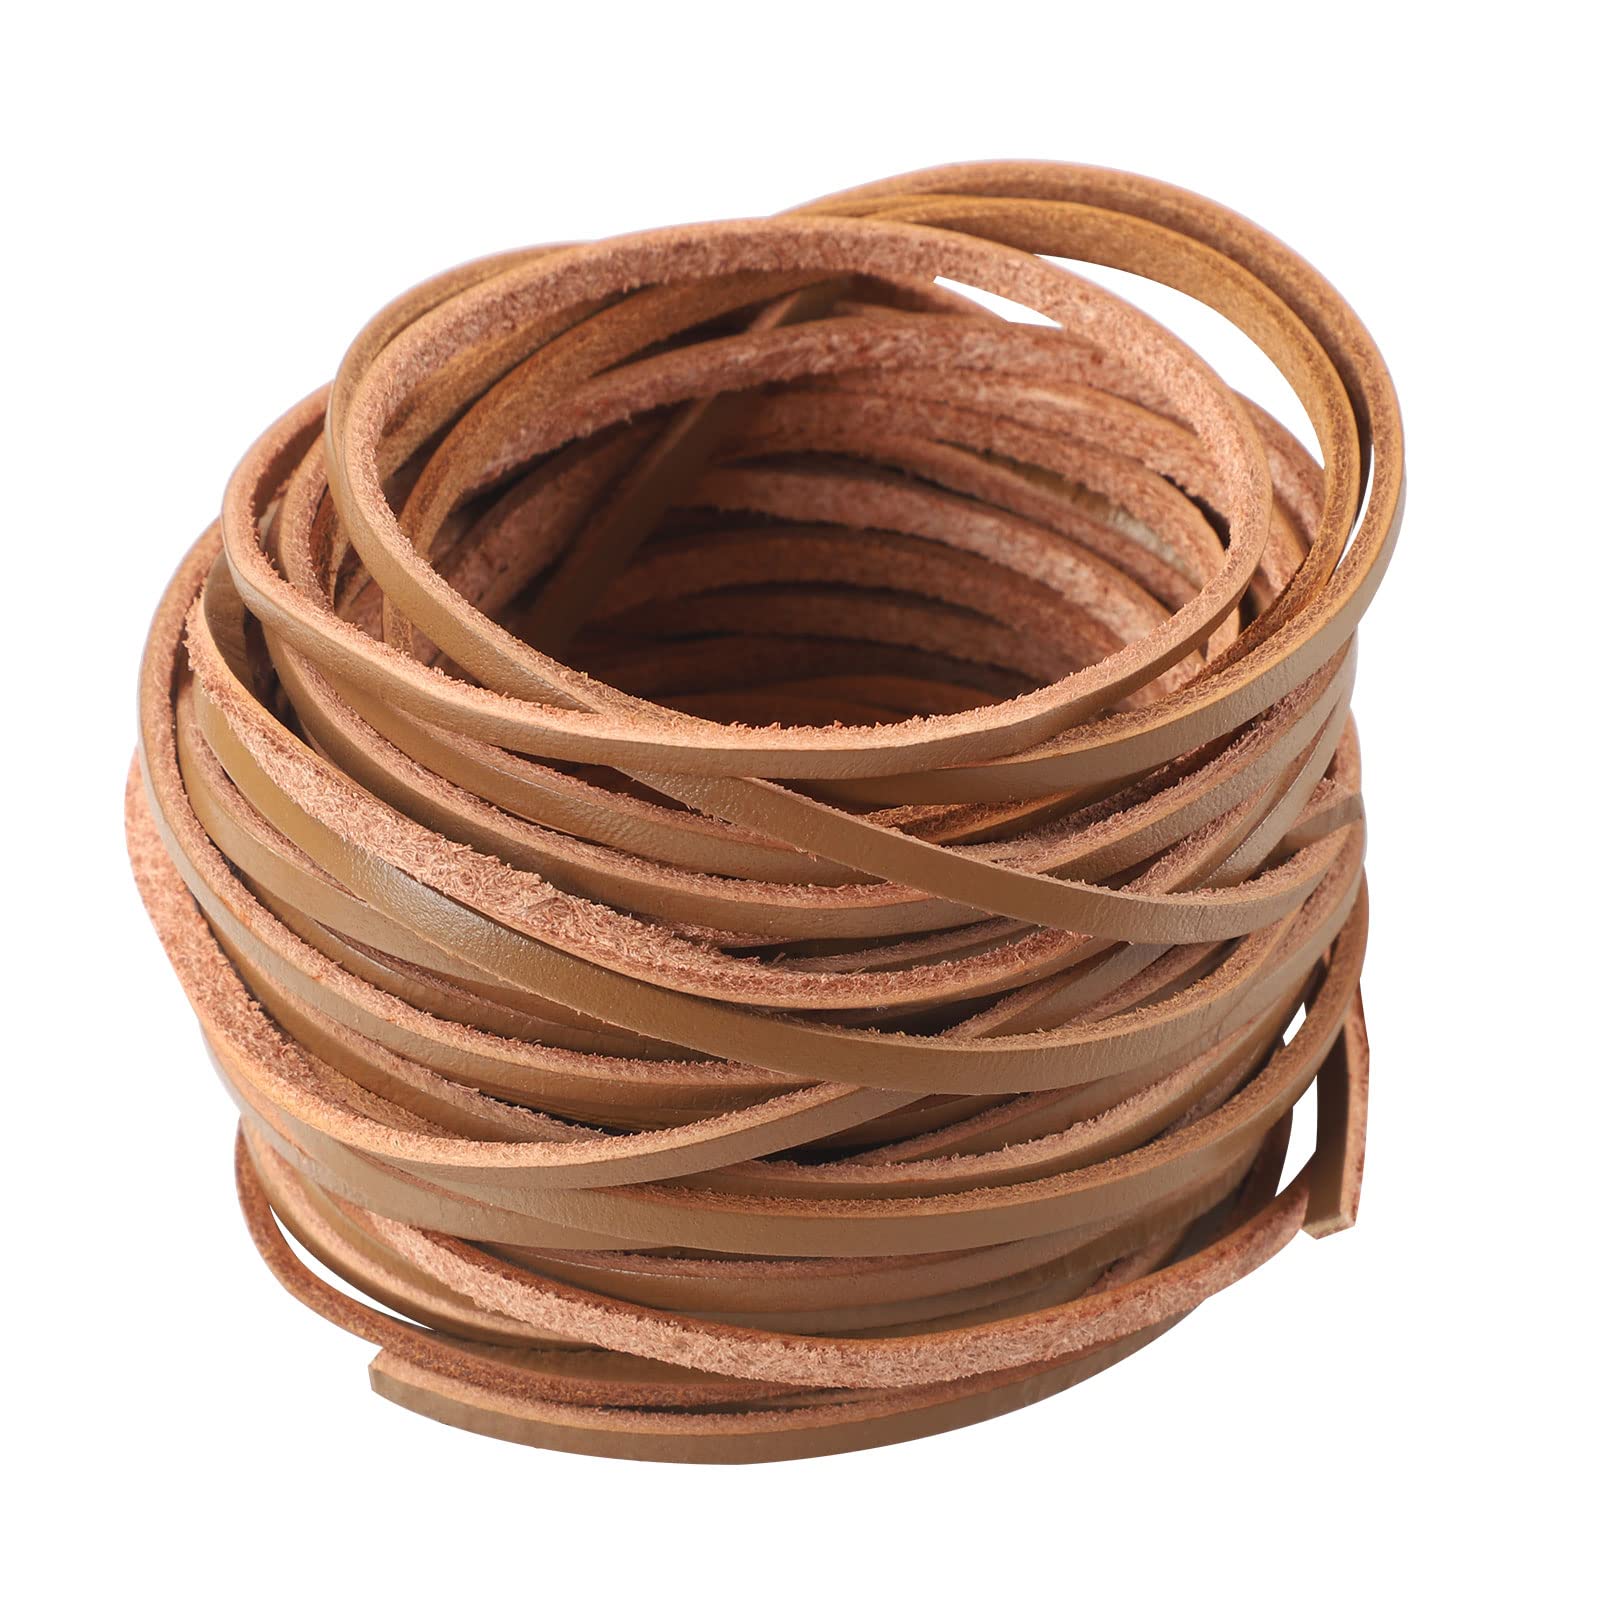 Braided leather Cord Vintage Gold Copper Color--jewelry  supplies--5mm--Copper-Quality Braided Leather Strand--Buy online Craft  Supplies---5M